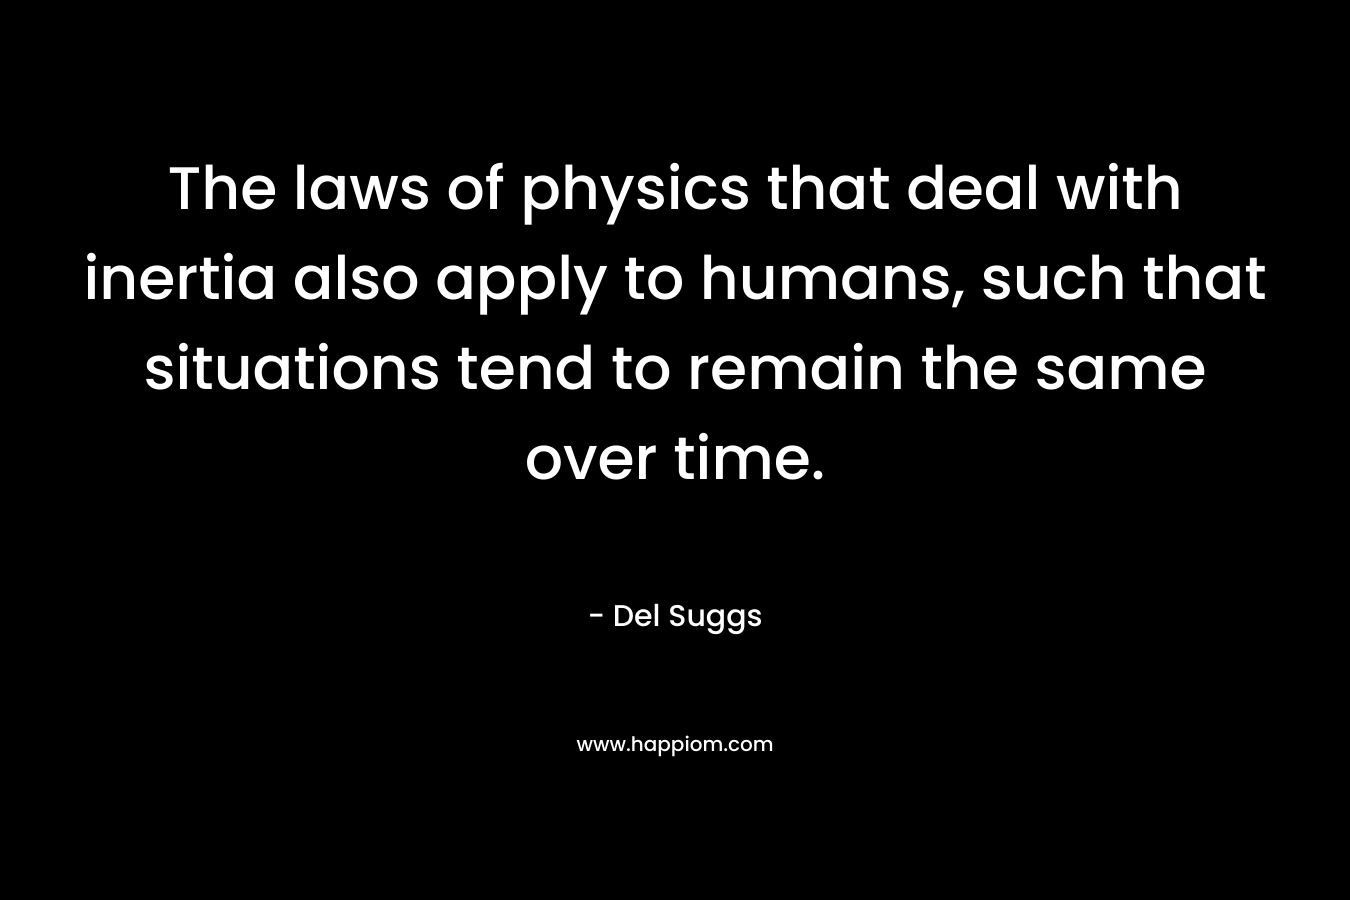 The laws of physics that deal with inertia also apply to humans, such that situations tend to remain the same over time.